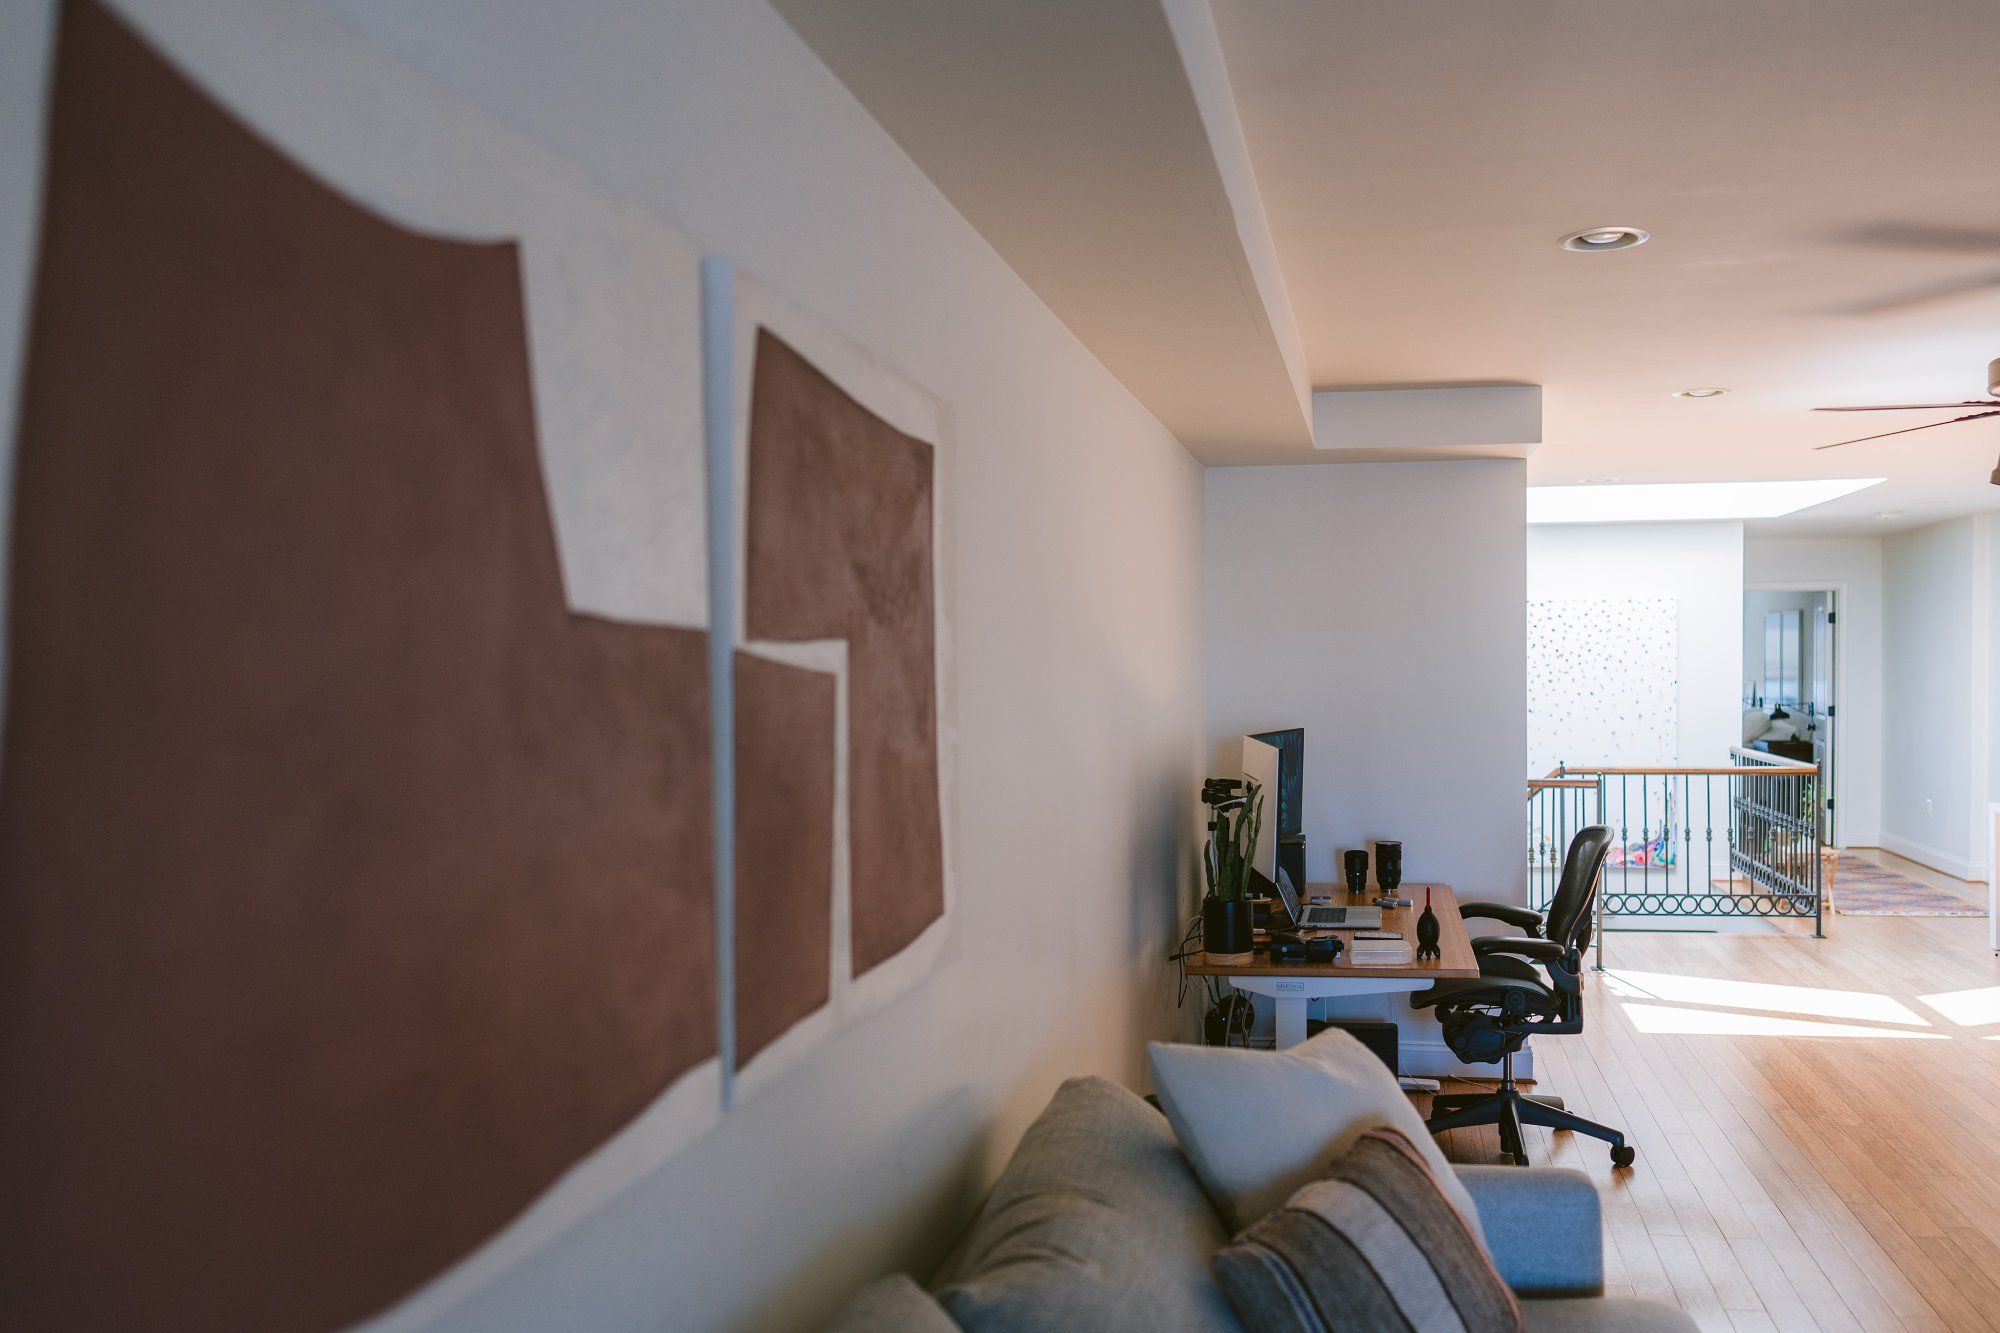 A spacious living area featuring an abstract brown and white wall art, with a view of a well-organised home office setup in the background, alongside a comfortable seating area and a balcony entrance with decorative railings